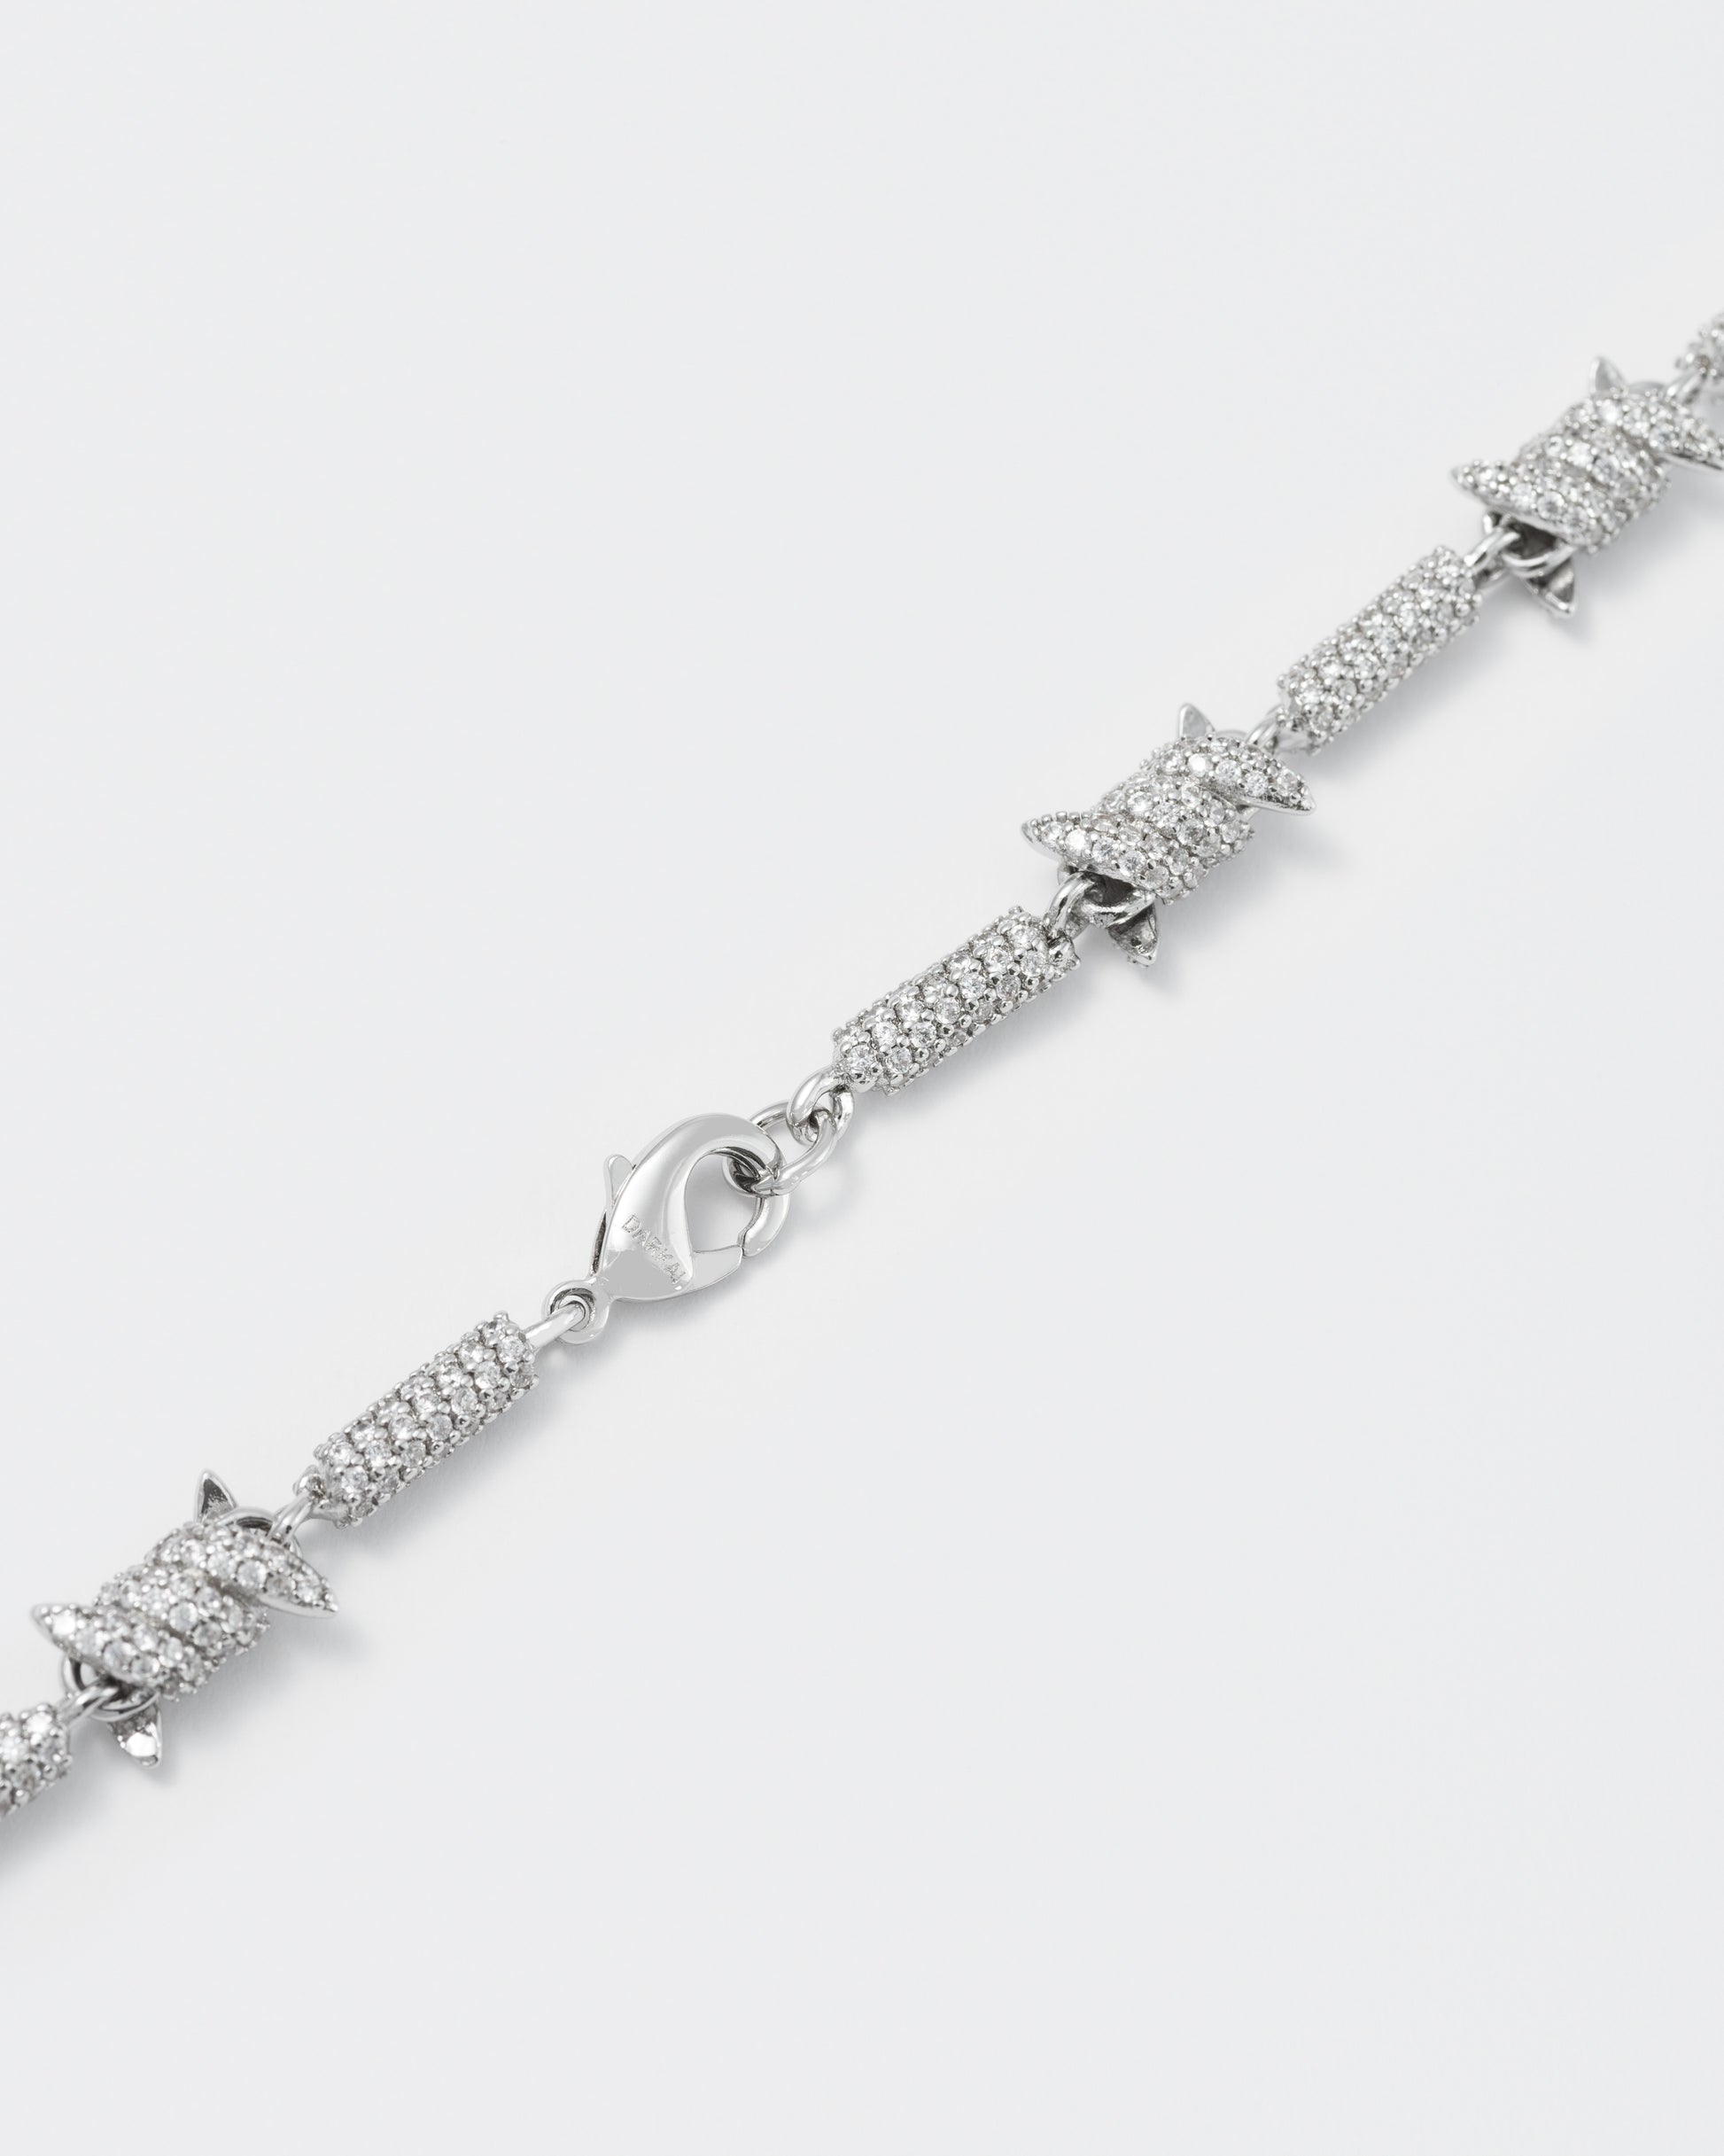 detail of barbed Wire bracelet with 18kt white gold coating and hand-set micropavé stones in diamond white. Lobster clasp closure with logo